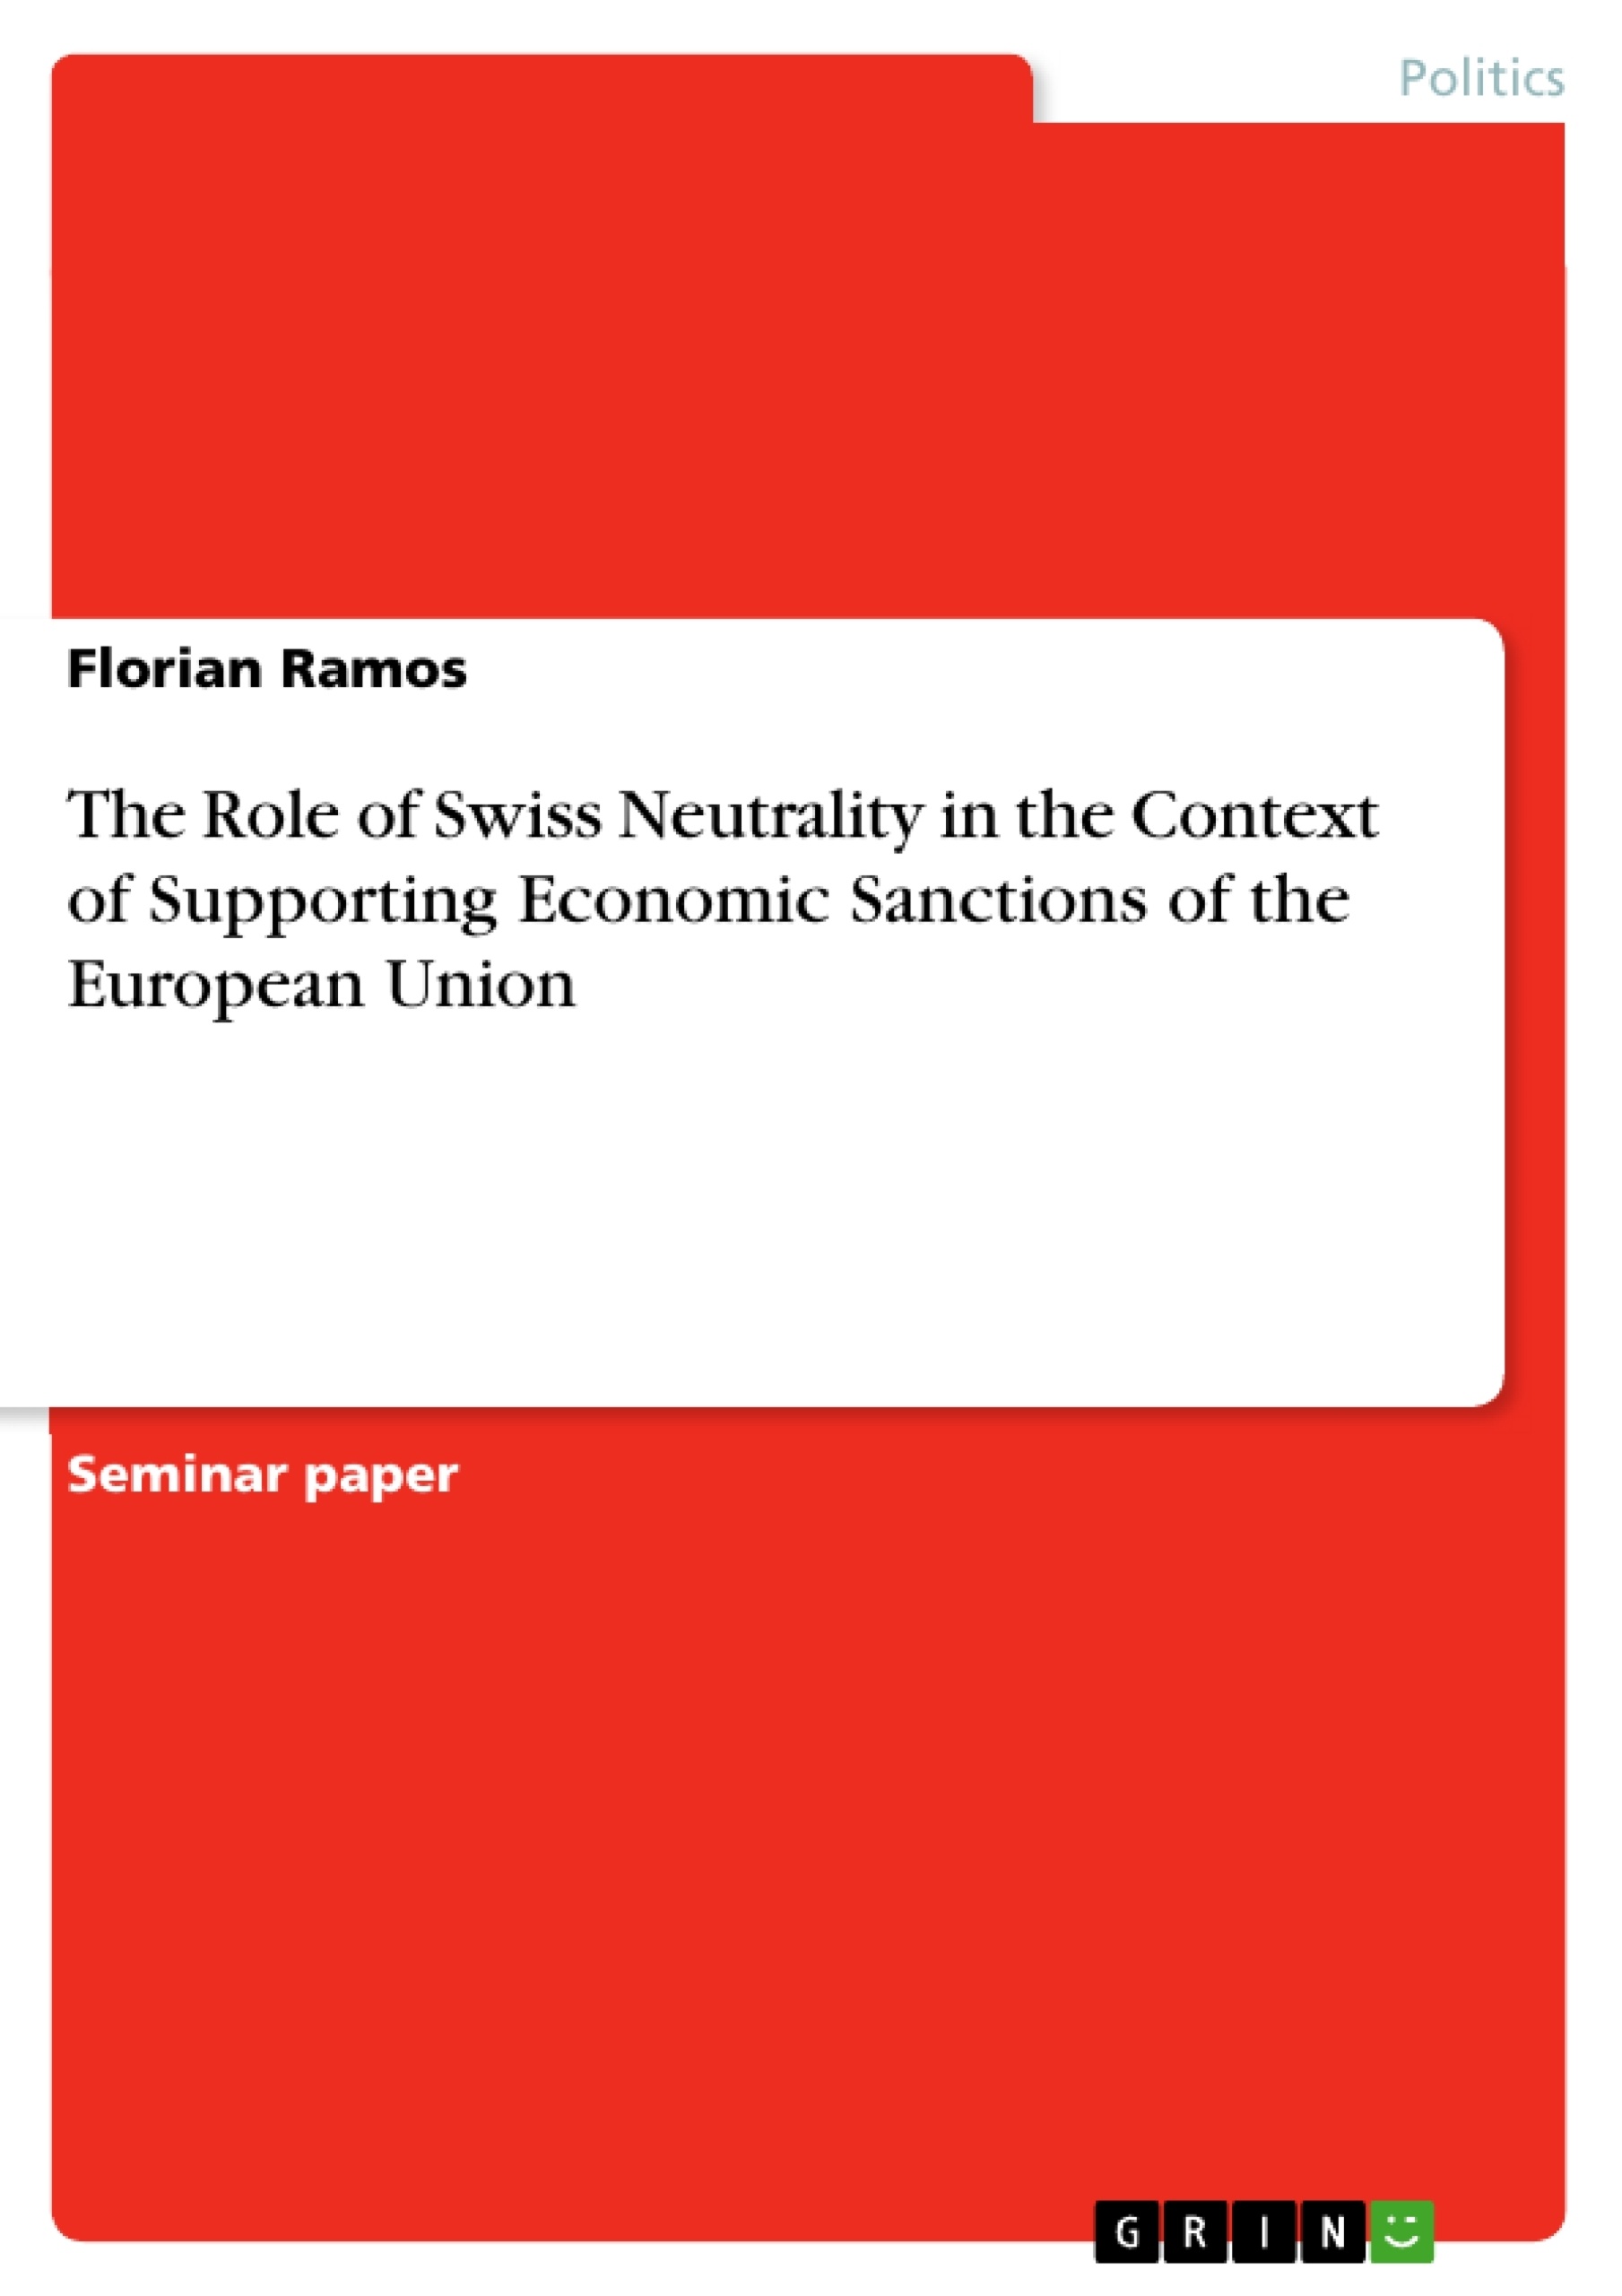 Título: The Role of Swiss Neutrality in the Context of Supporting Economic Sanctions of the European Union